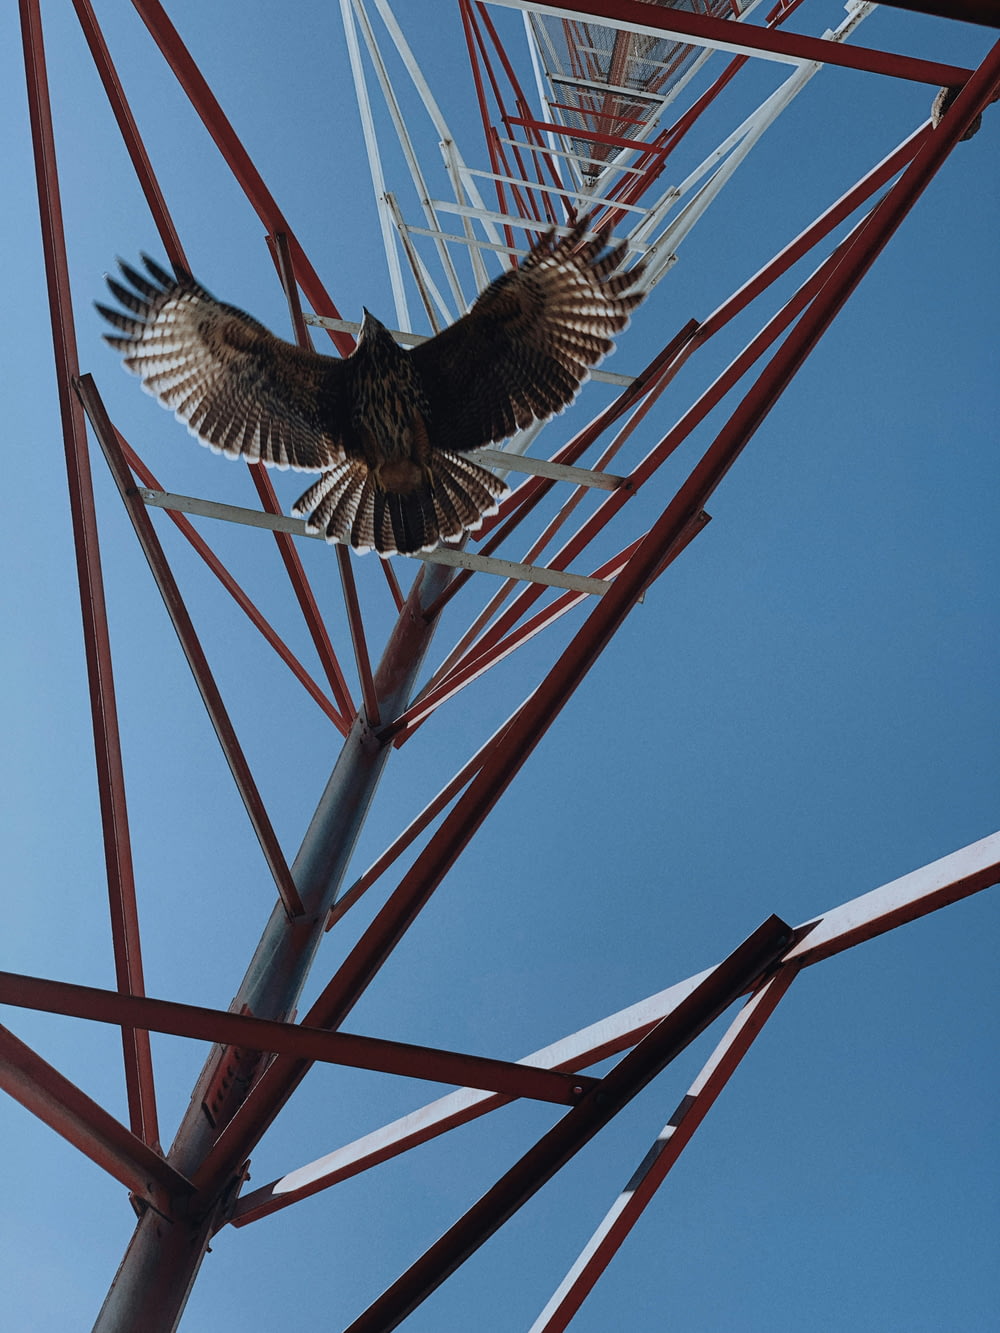 a bird is perched on top of a metal structure